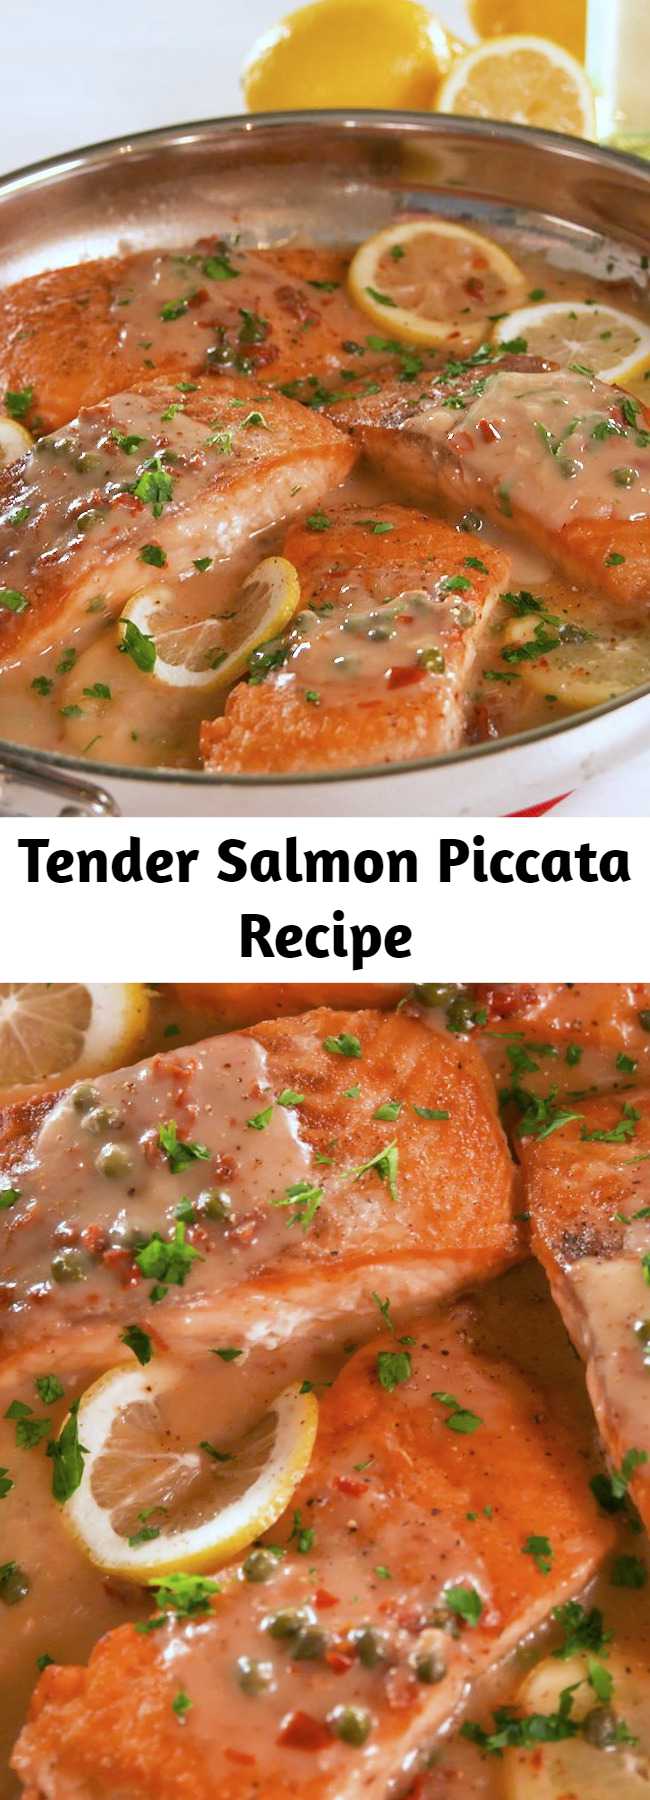 Tender Salmon Piccata Recipe - Tender lemony salmon piccata is ready in 30 min. Get started on that Mediterranean diet with this recipe. Fish are friends AND food. #easyrecipe #salmon #seafood #dinner #fish